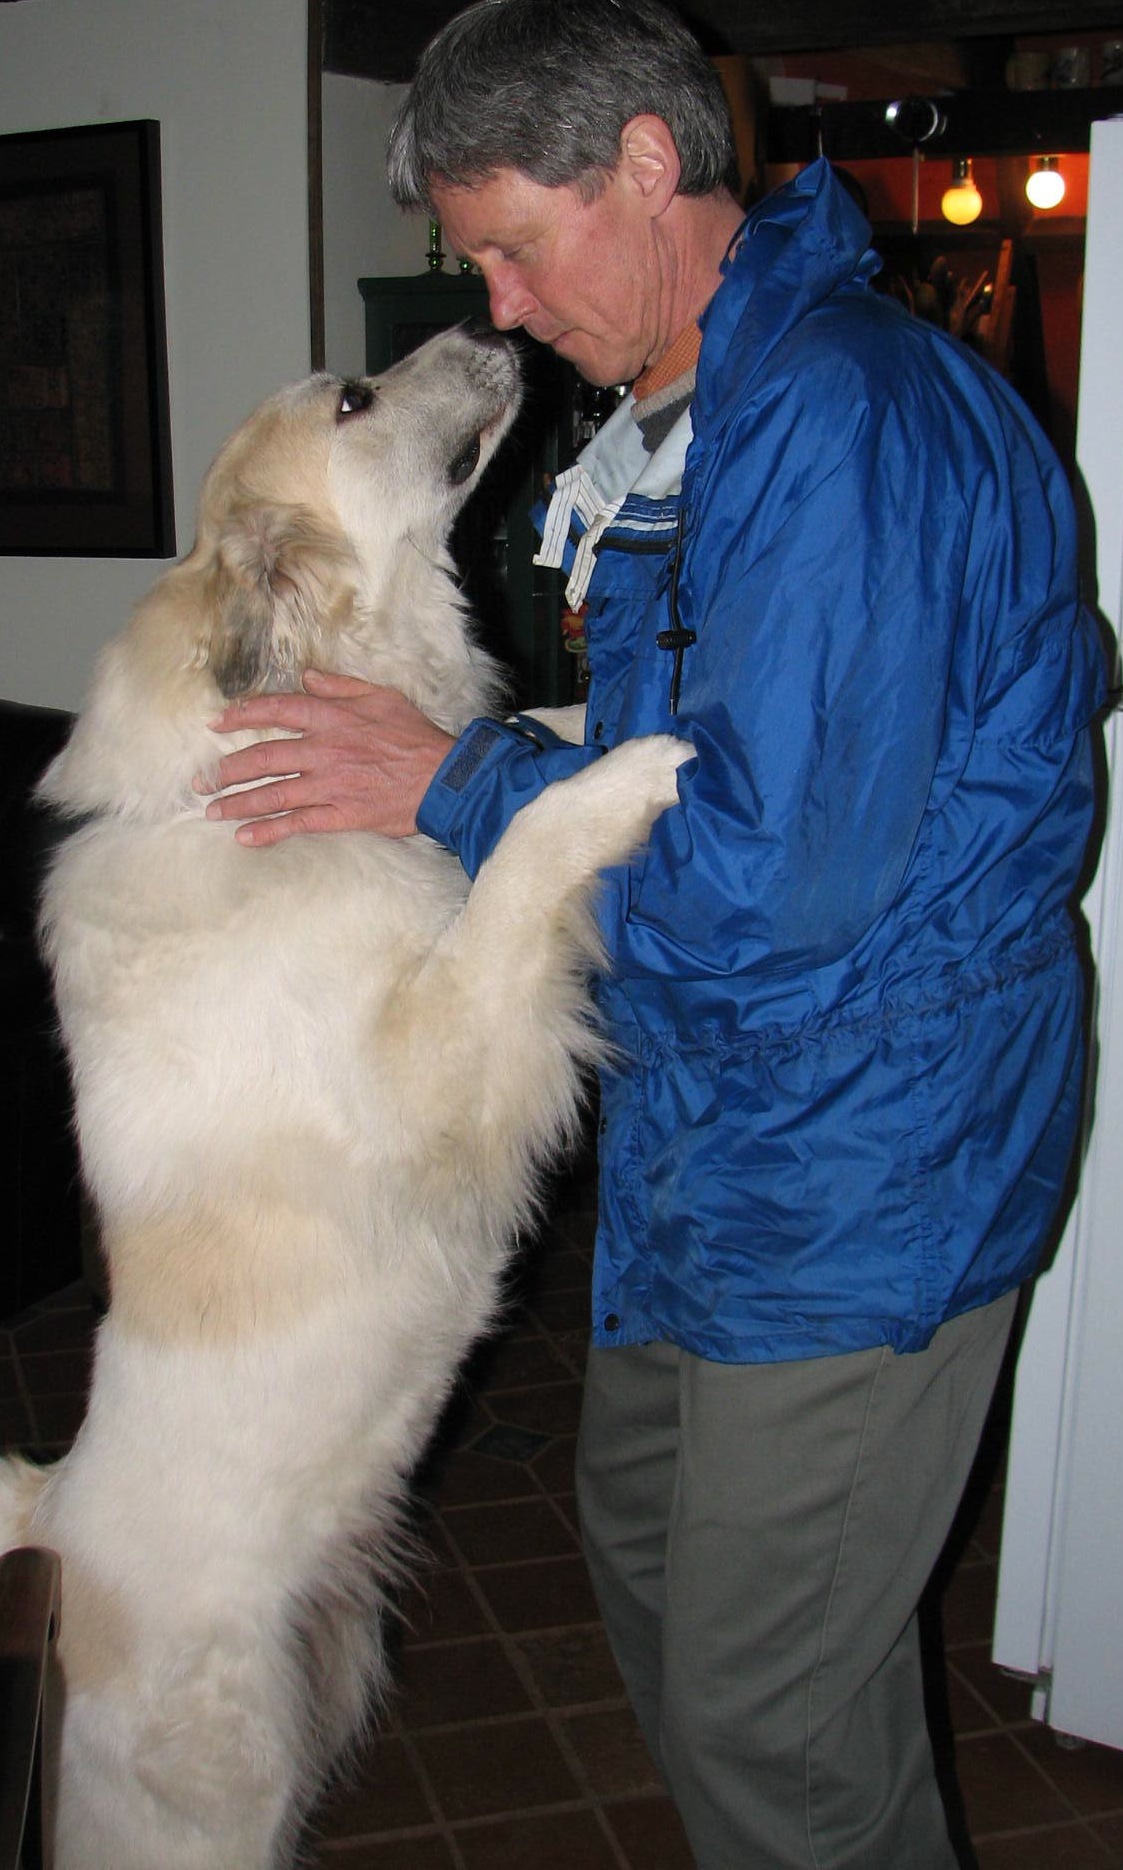 white dog standing on hind legs looking up at a man